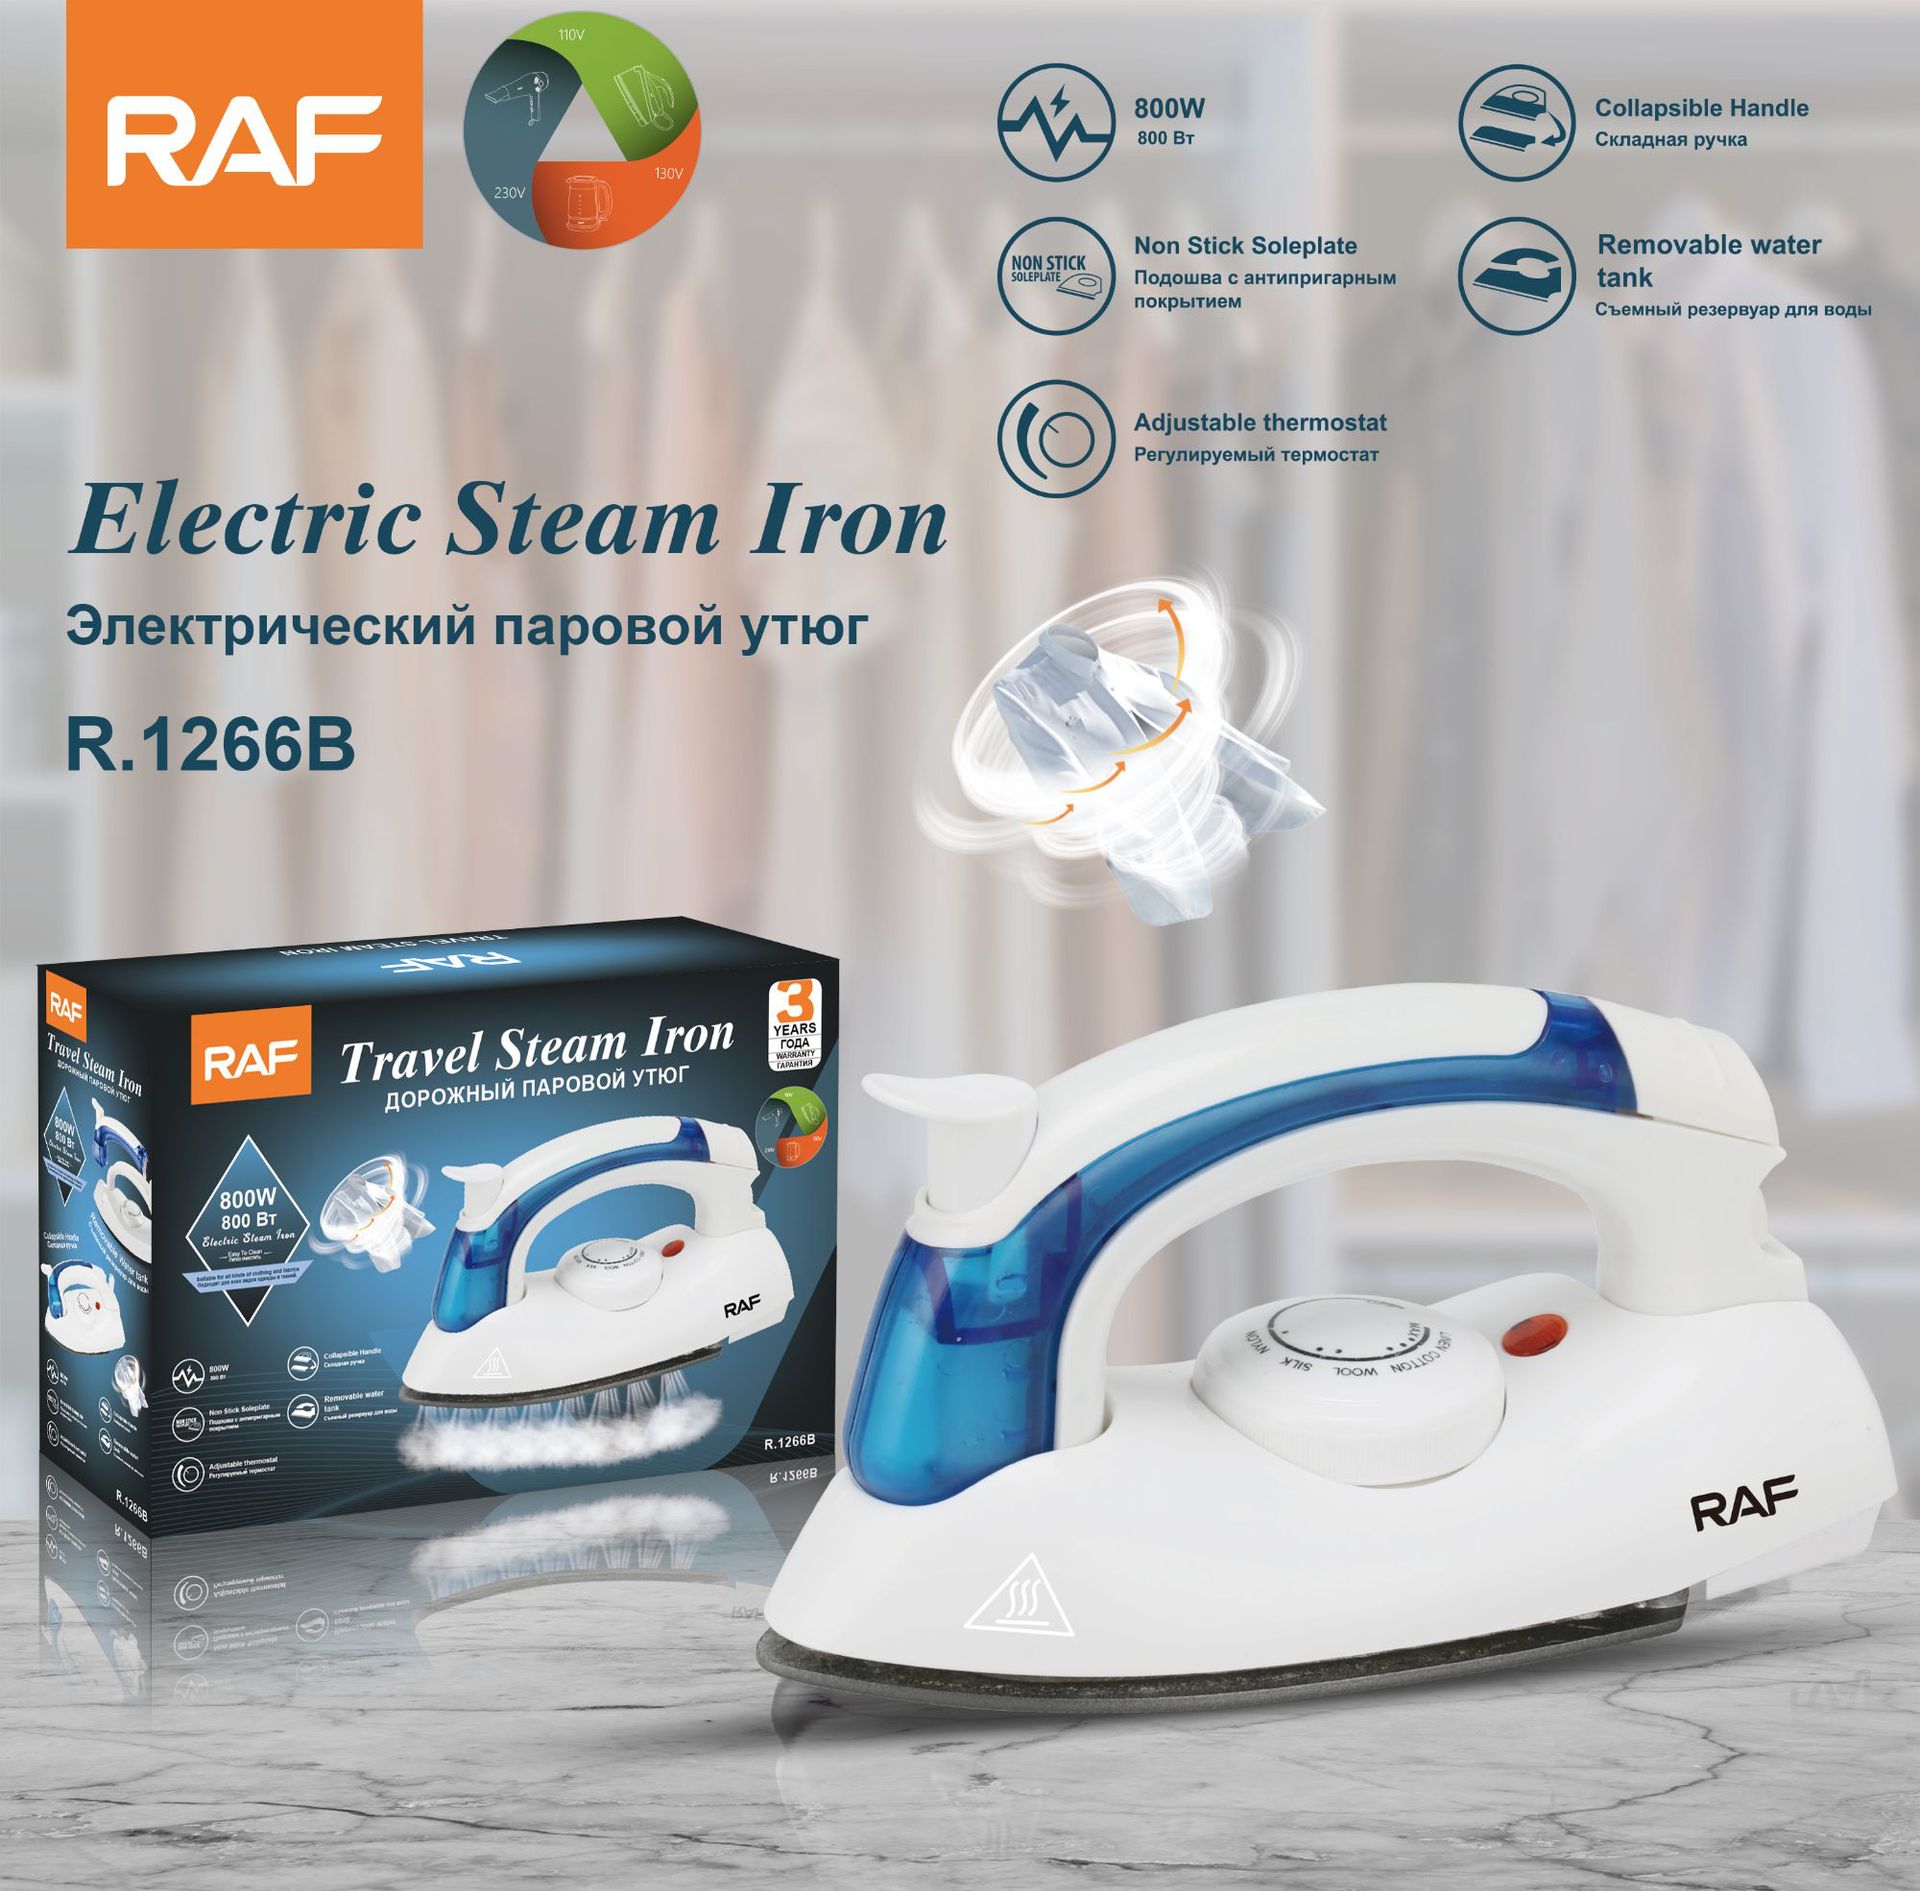 RAF R.126 Iron with 3 Gear Temperature Adjustment and Teflons Non-Stick Bottom Plate - Efficient and Durable Iron for Home Use.